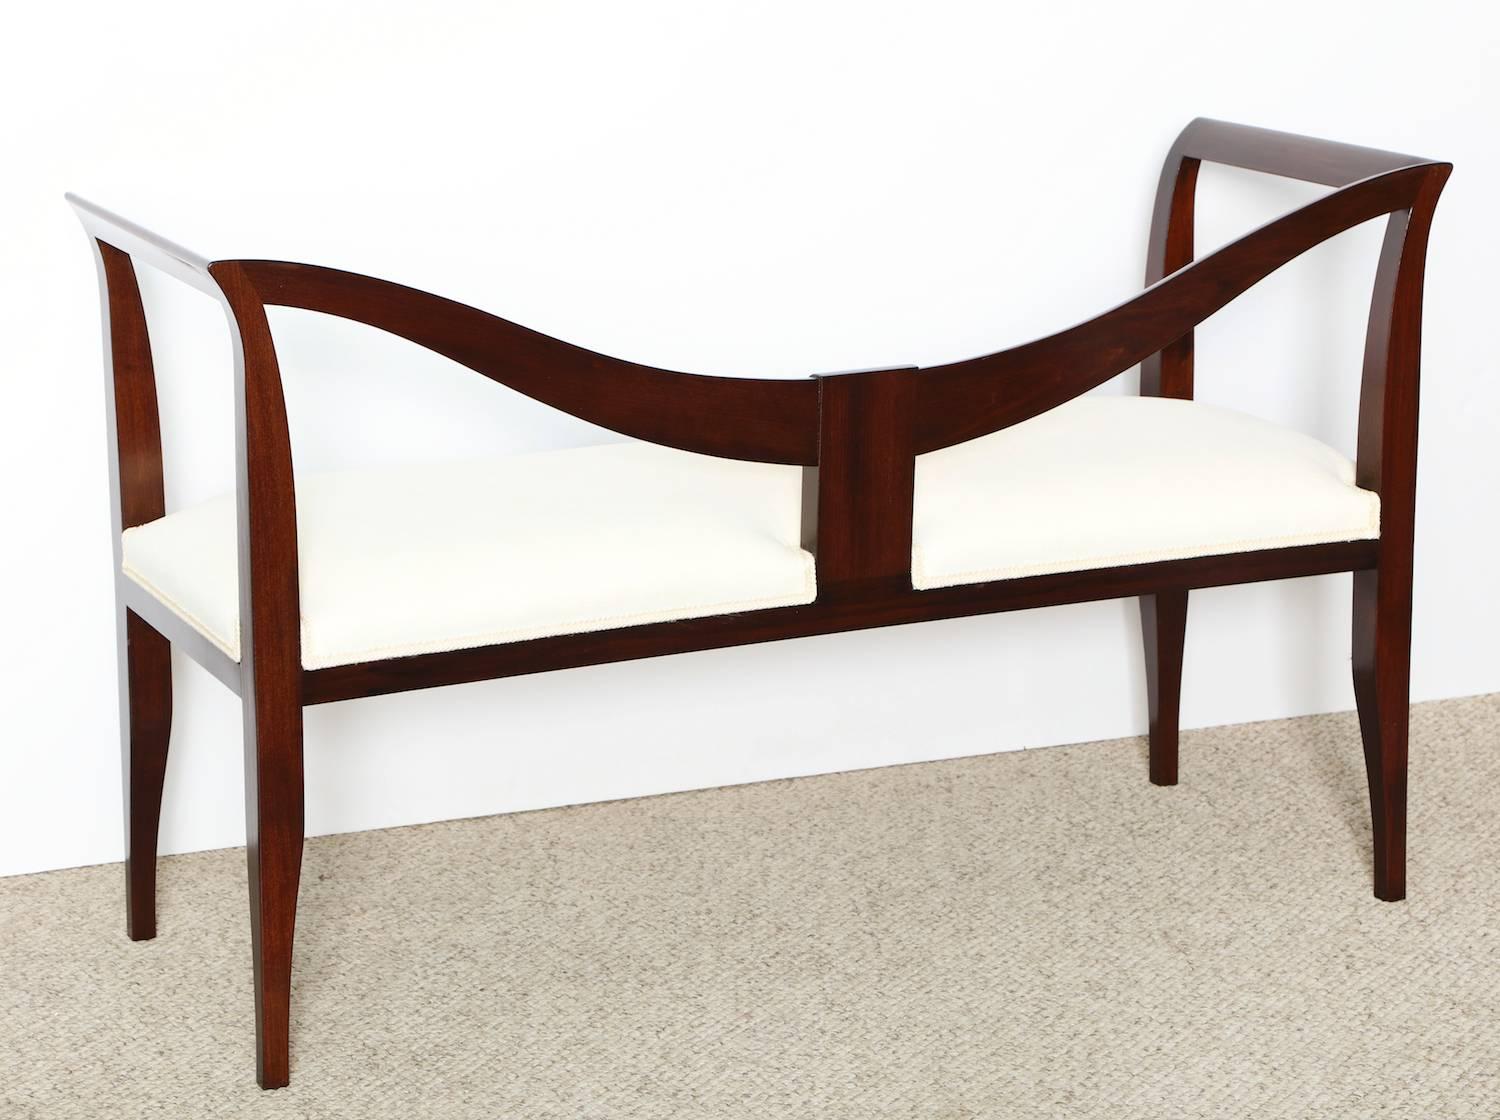 Elegant bench with curving, dark-wood frame and upholstered seat. Recently refinished and re-upholstered. Published in L'Arredamento Moderno, 2nd series, 1939. Fig. 512.